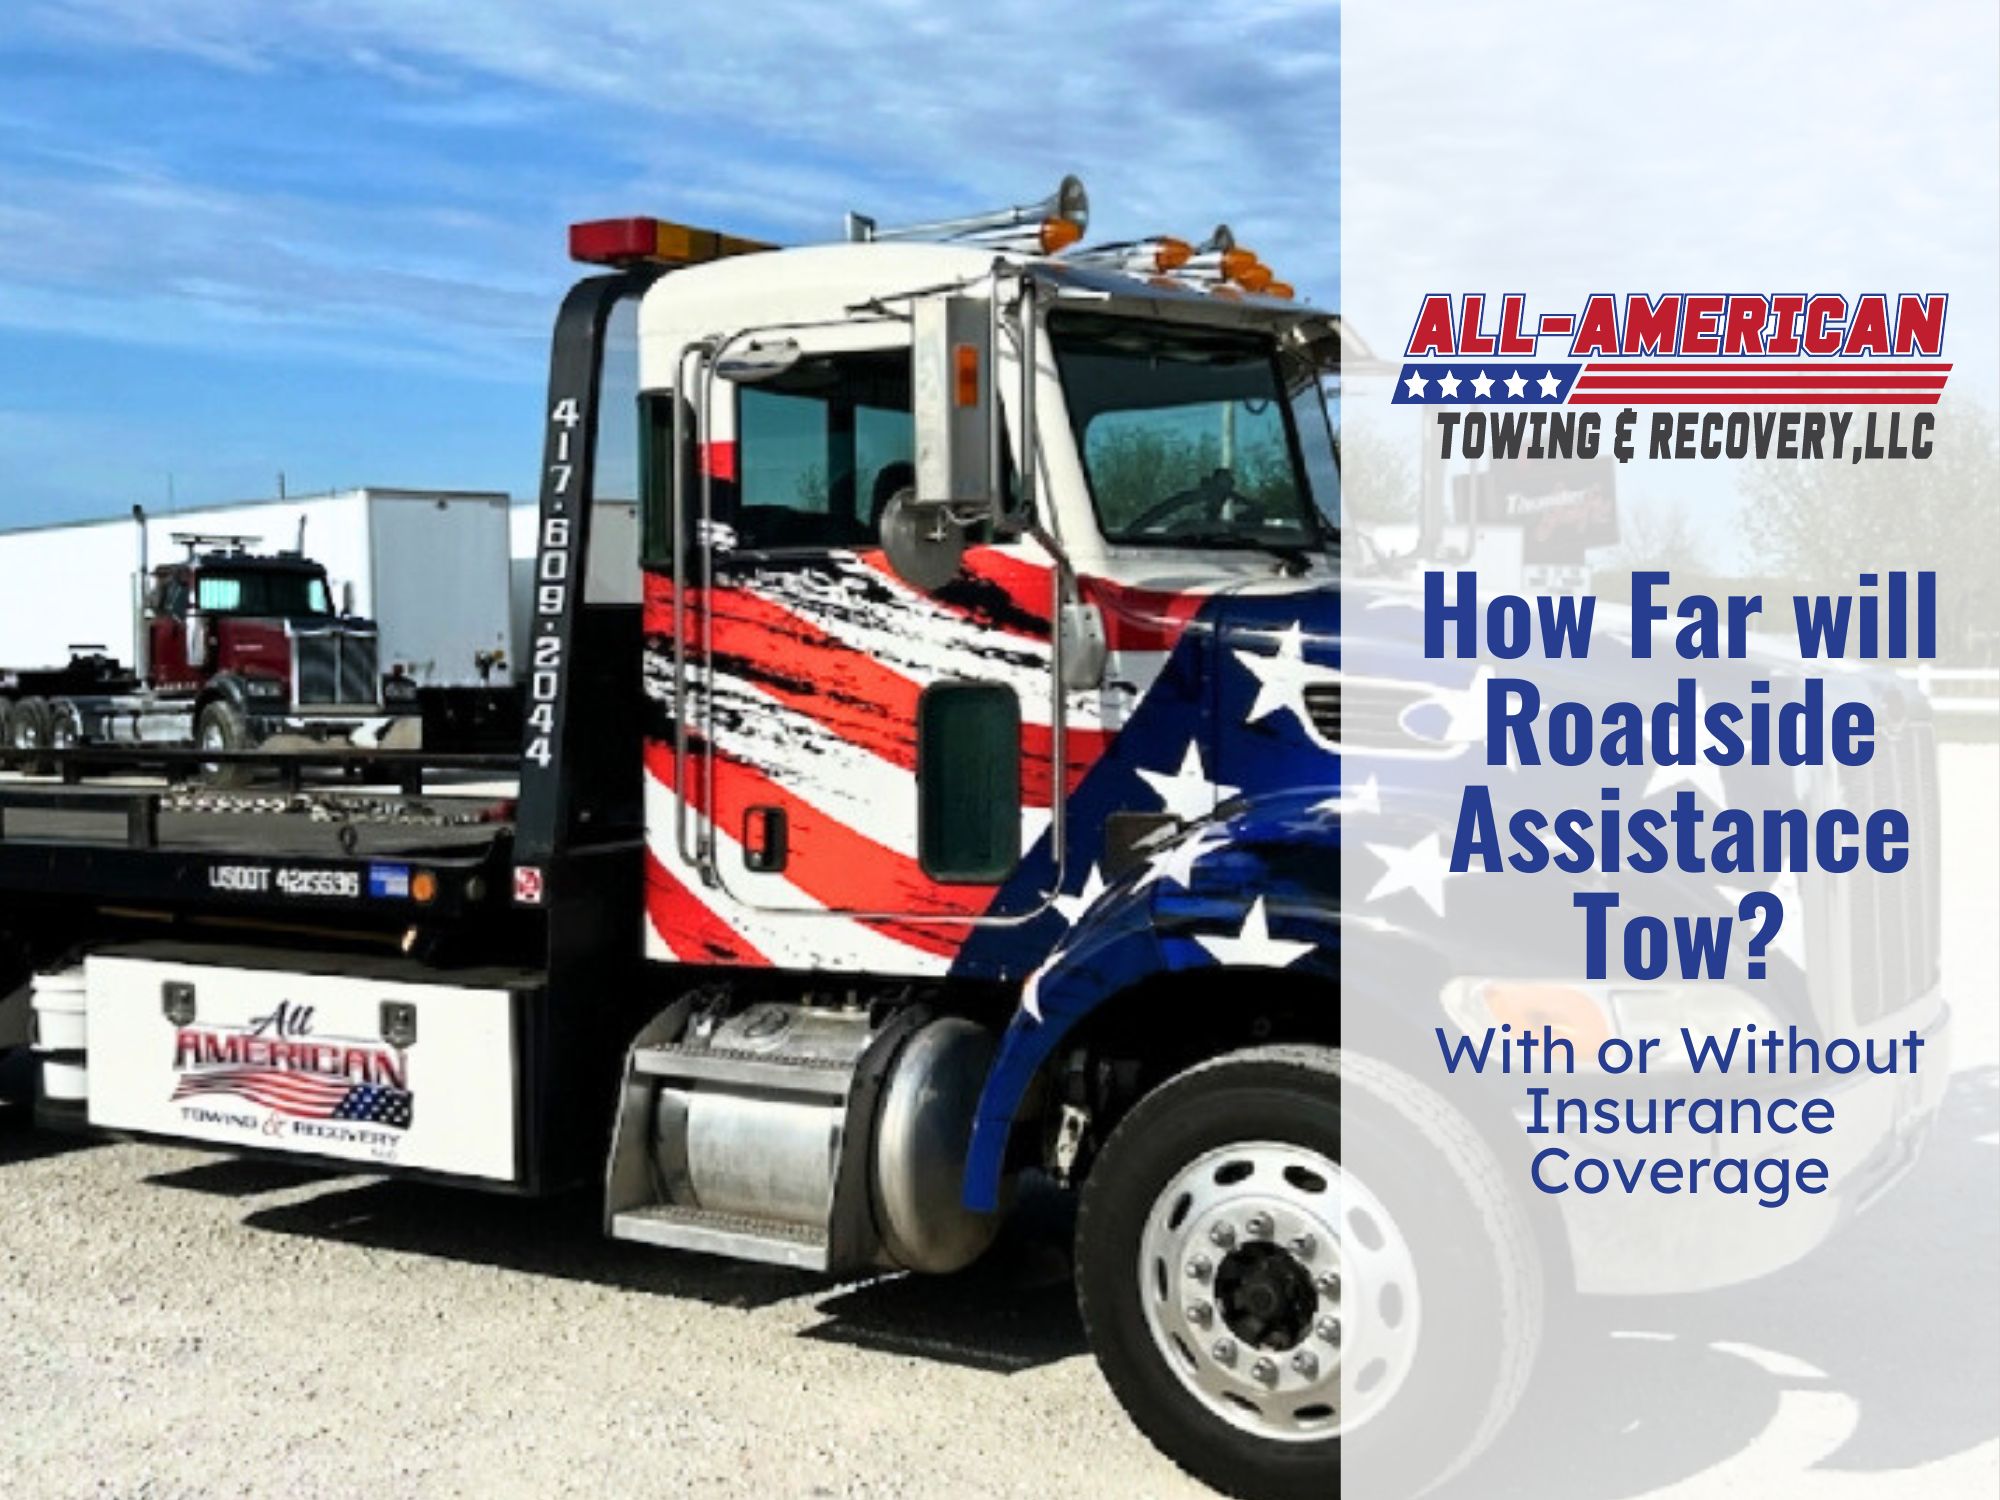 How Far Will Roadside Assistance Tow?